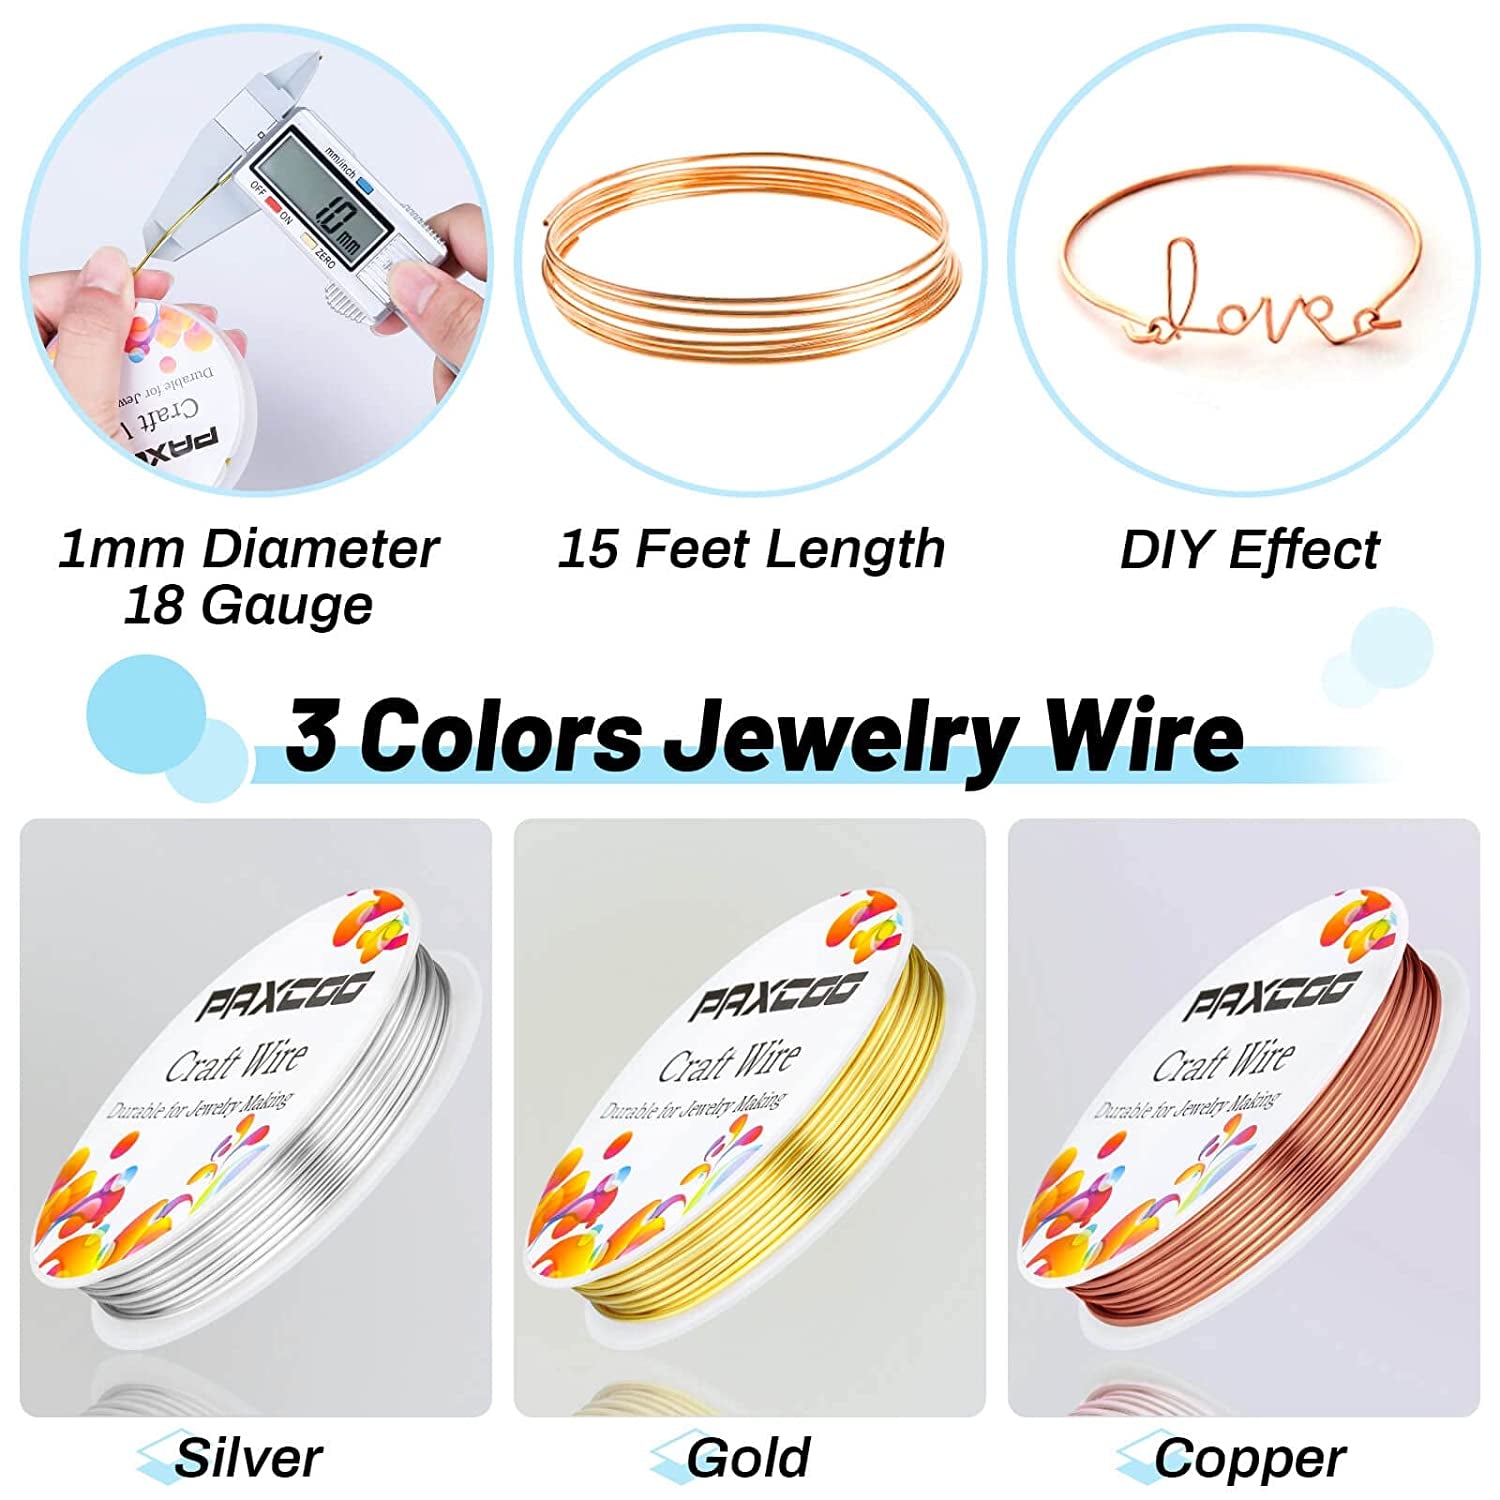 3 Pack Jewelry Wire Craft Wire 18 Gauge Tarnish Resistant Jewelry Beading Wire for Jewelry Making Supplies and Crafting (Silver, Gold and Copper)